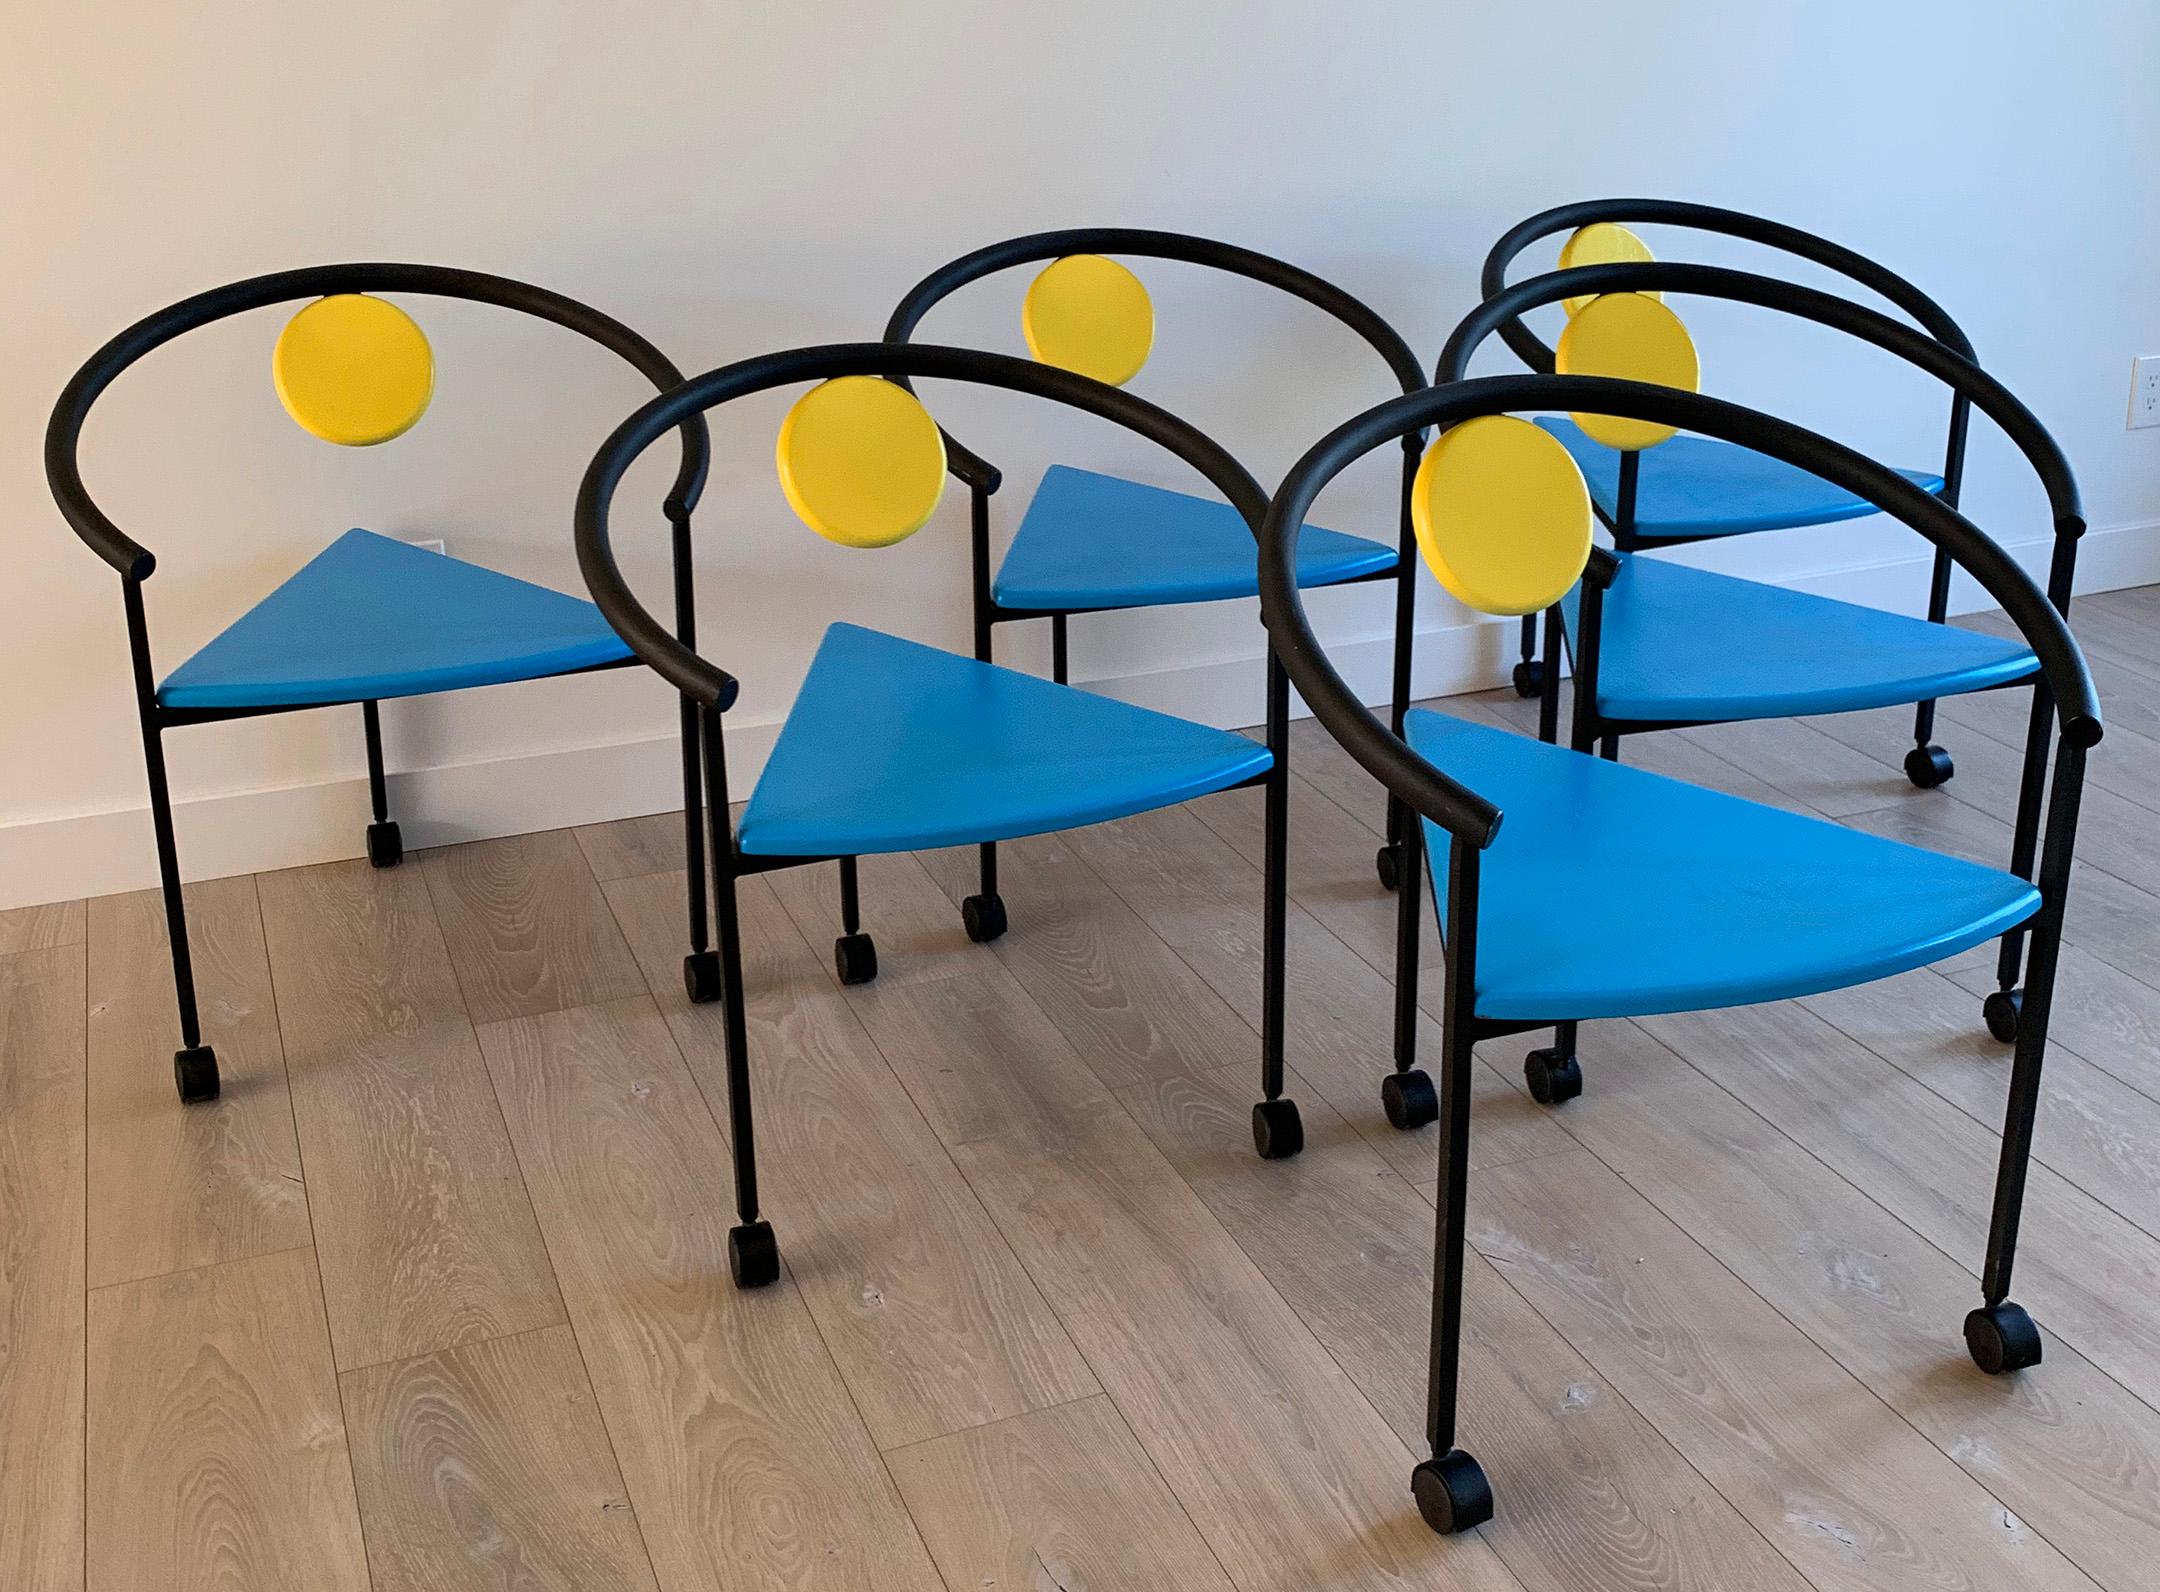 Powder-Coated 6 Memphis Postmodern Three-Legged Dining Chairs Manner of Michele De Lucci